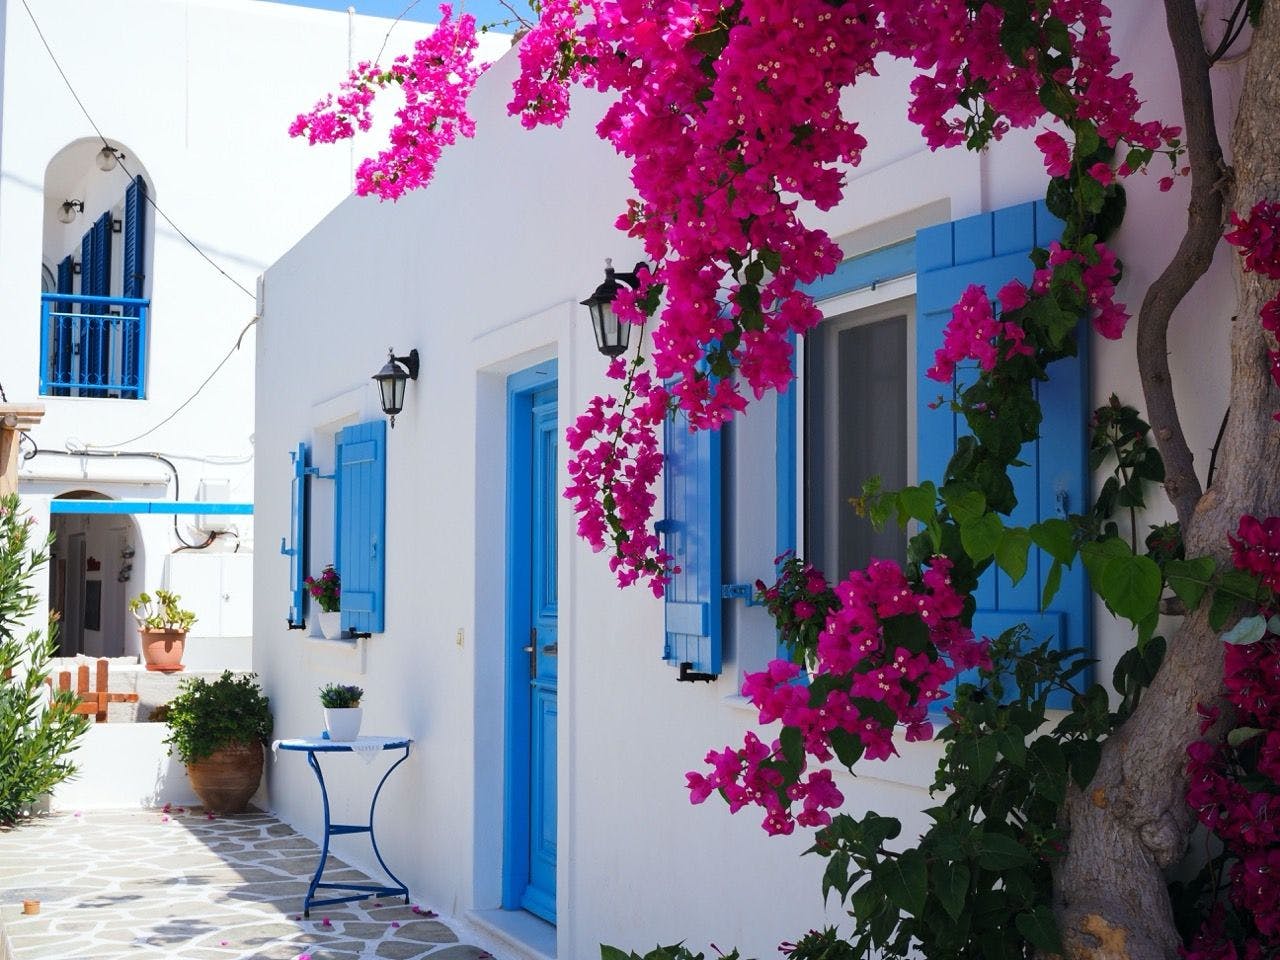 White house with blue doors and windows in Santorini Greece